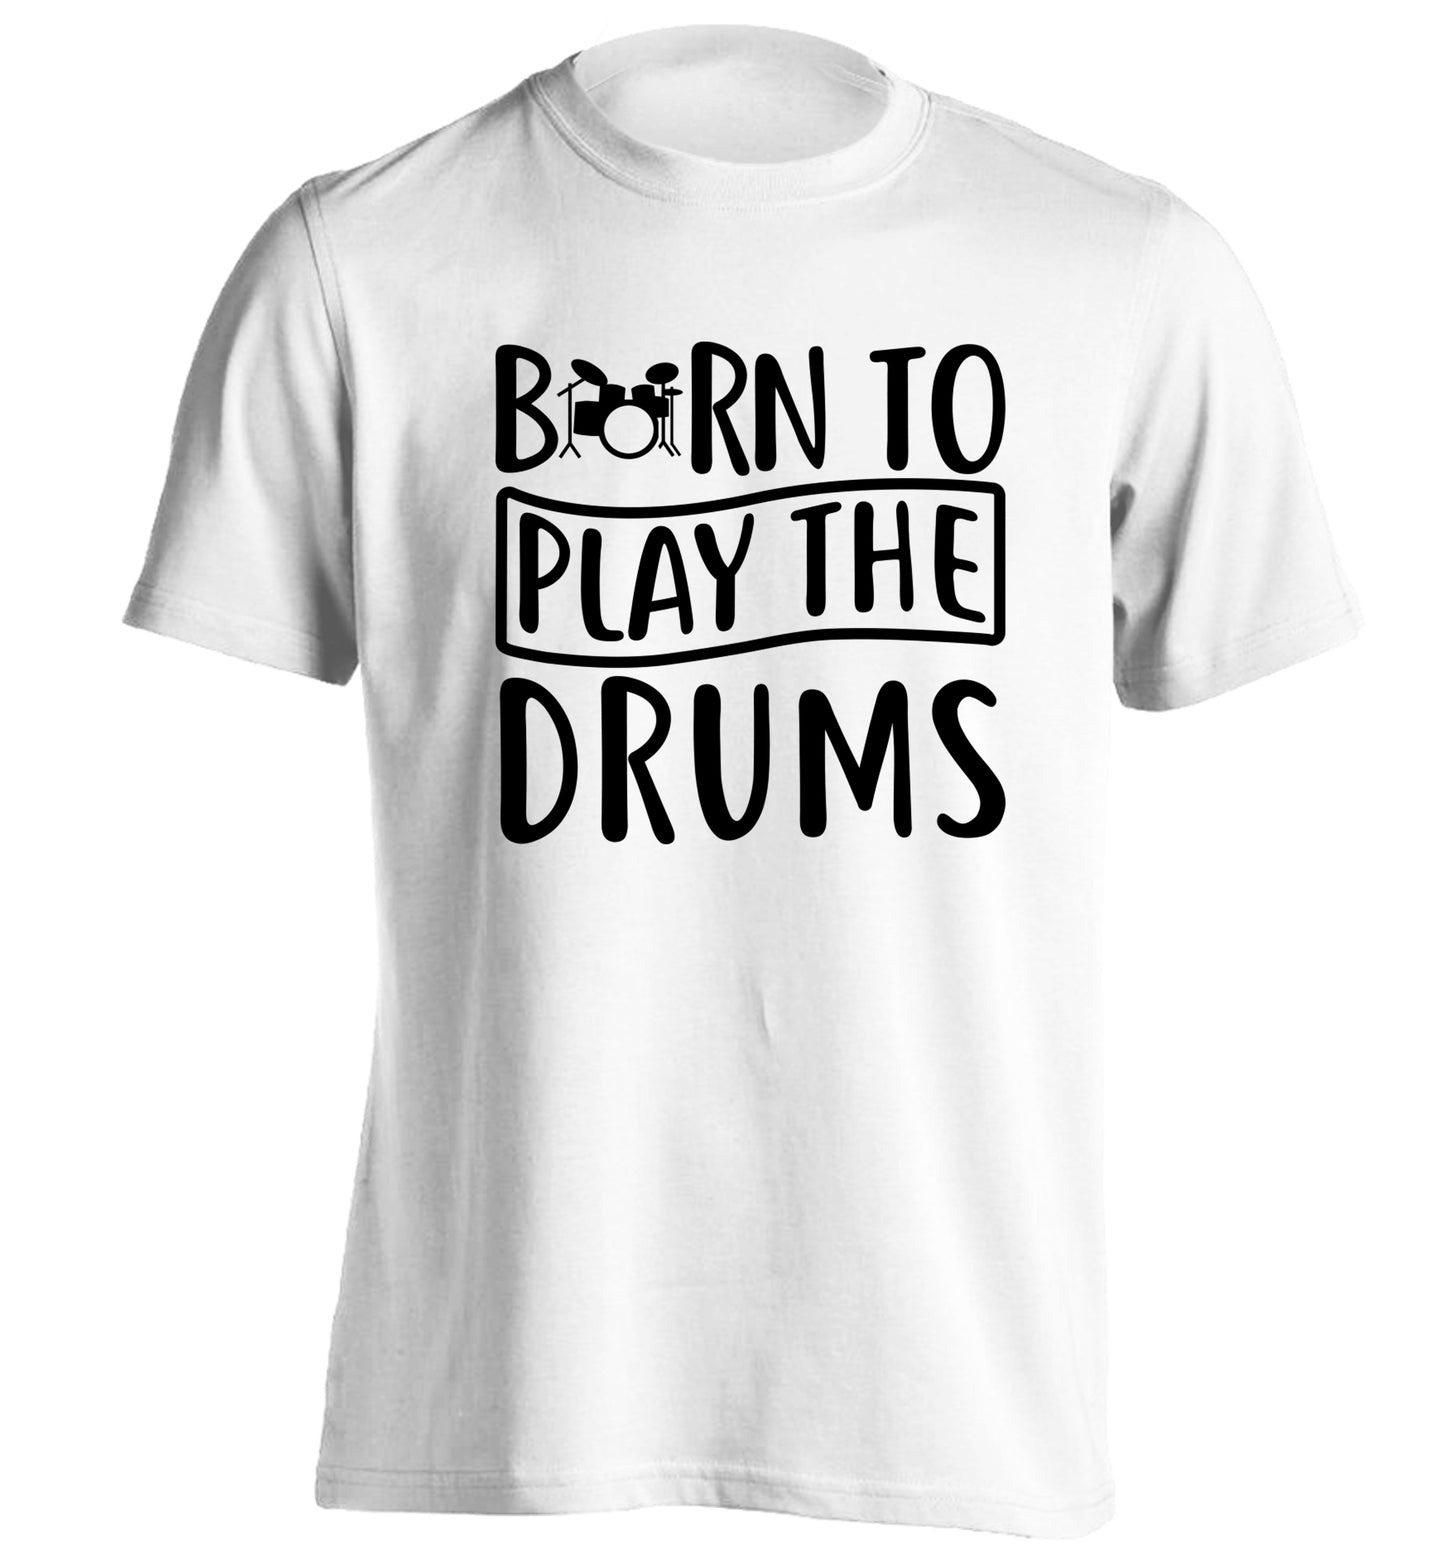 Born to play the drums adults unisex white Tshirt 2XL